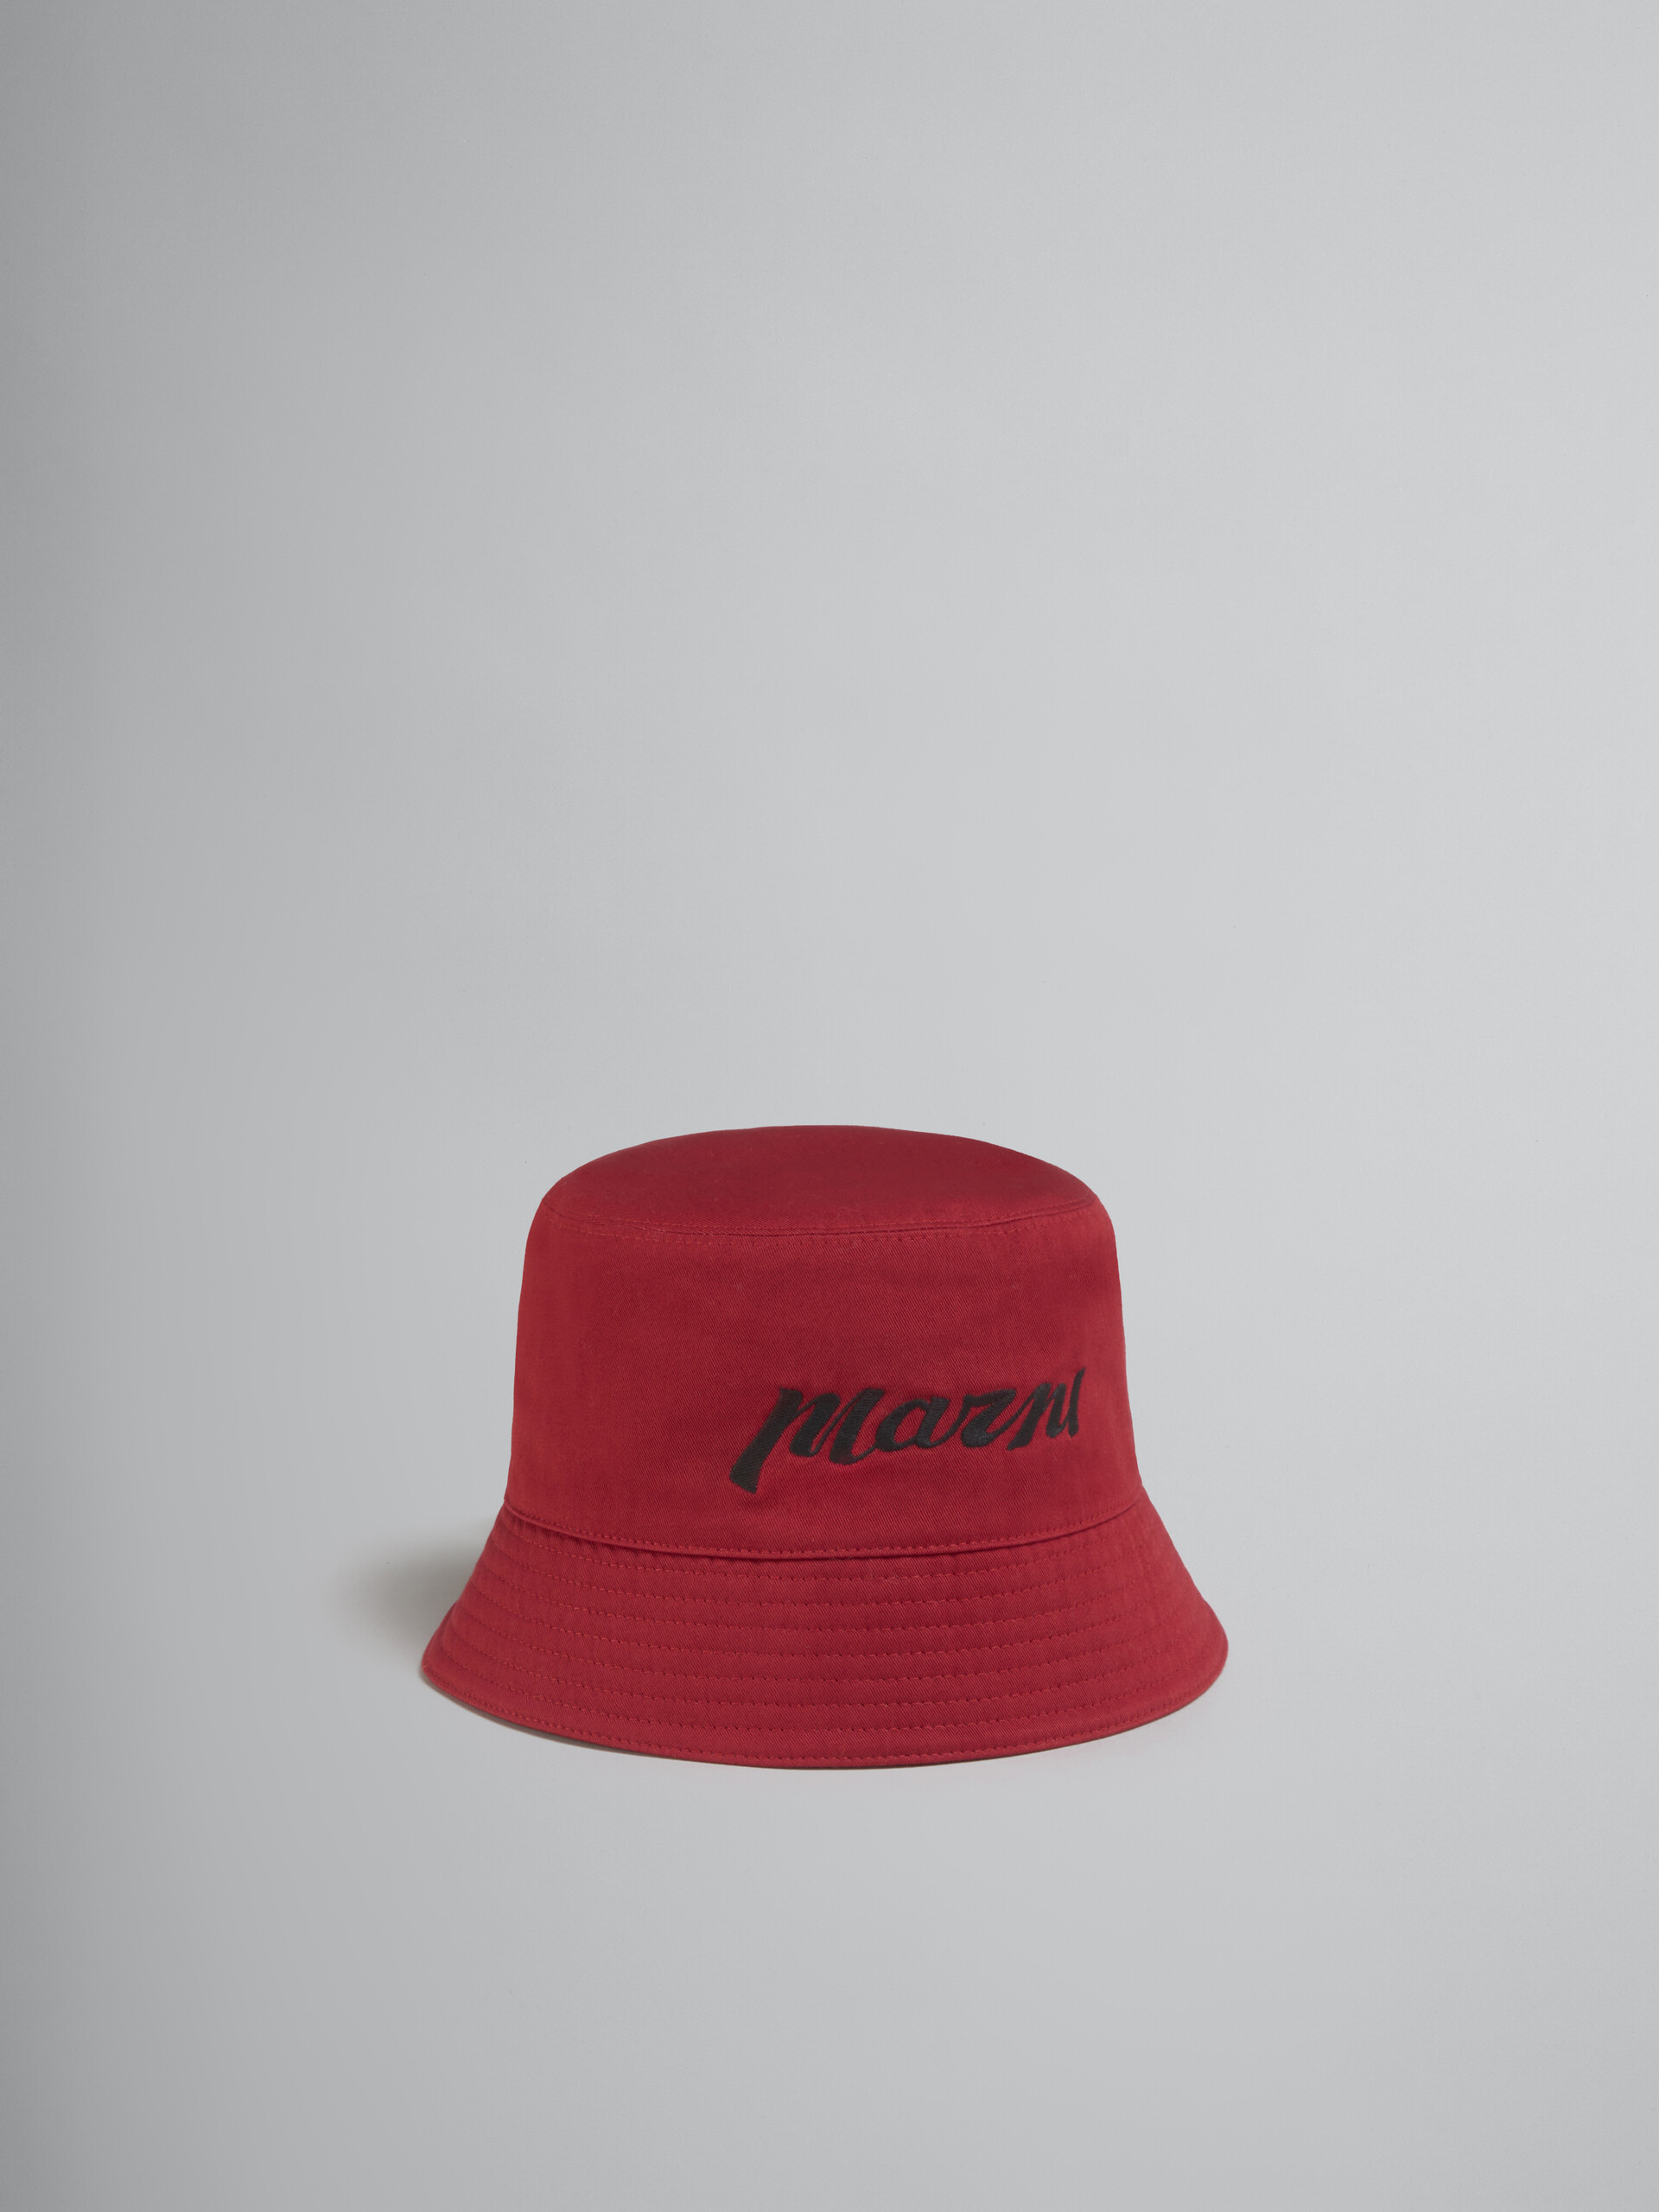 Black twill bucket hat with embroidered logo - Hats - Image 1